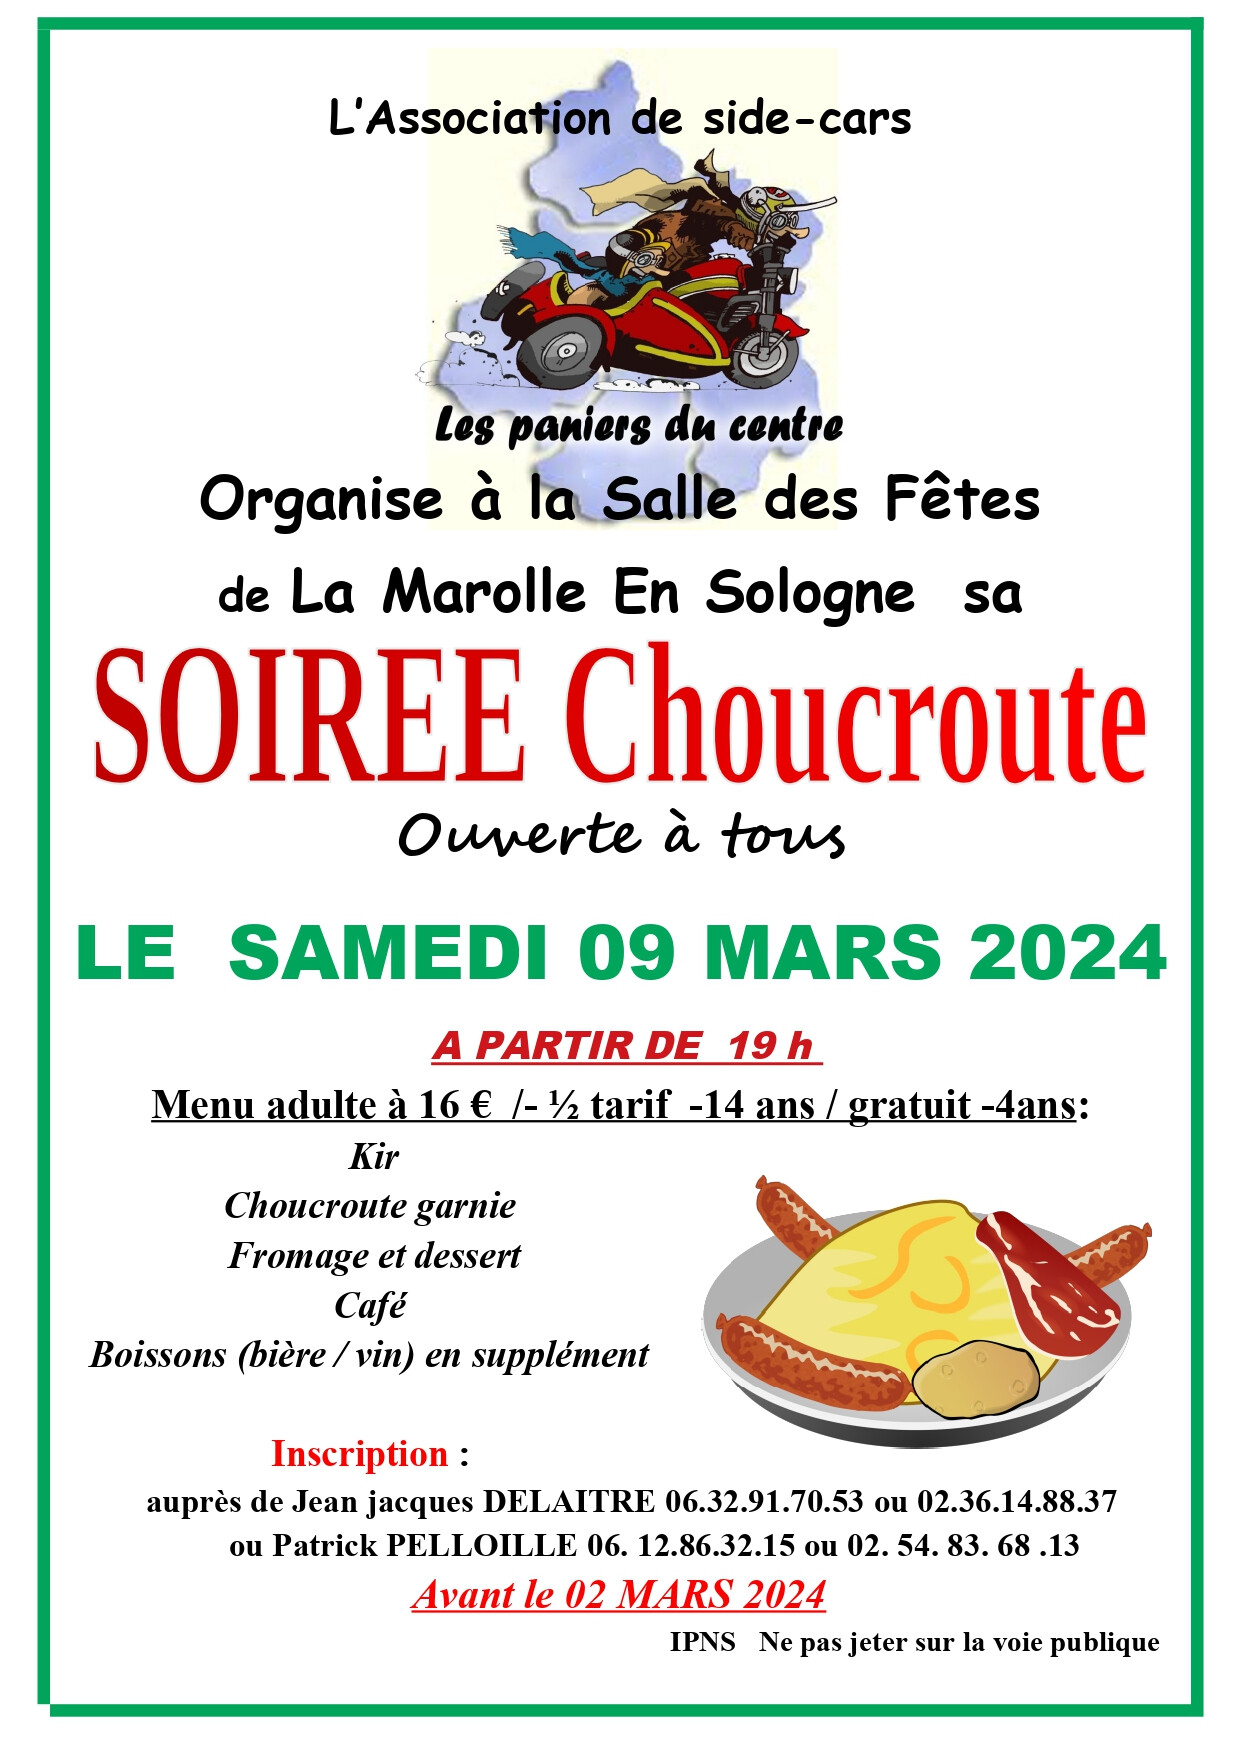 Soiree choucroute 09 03 24